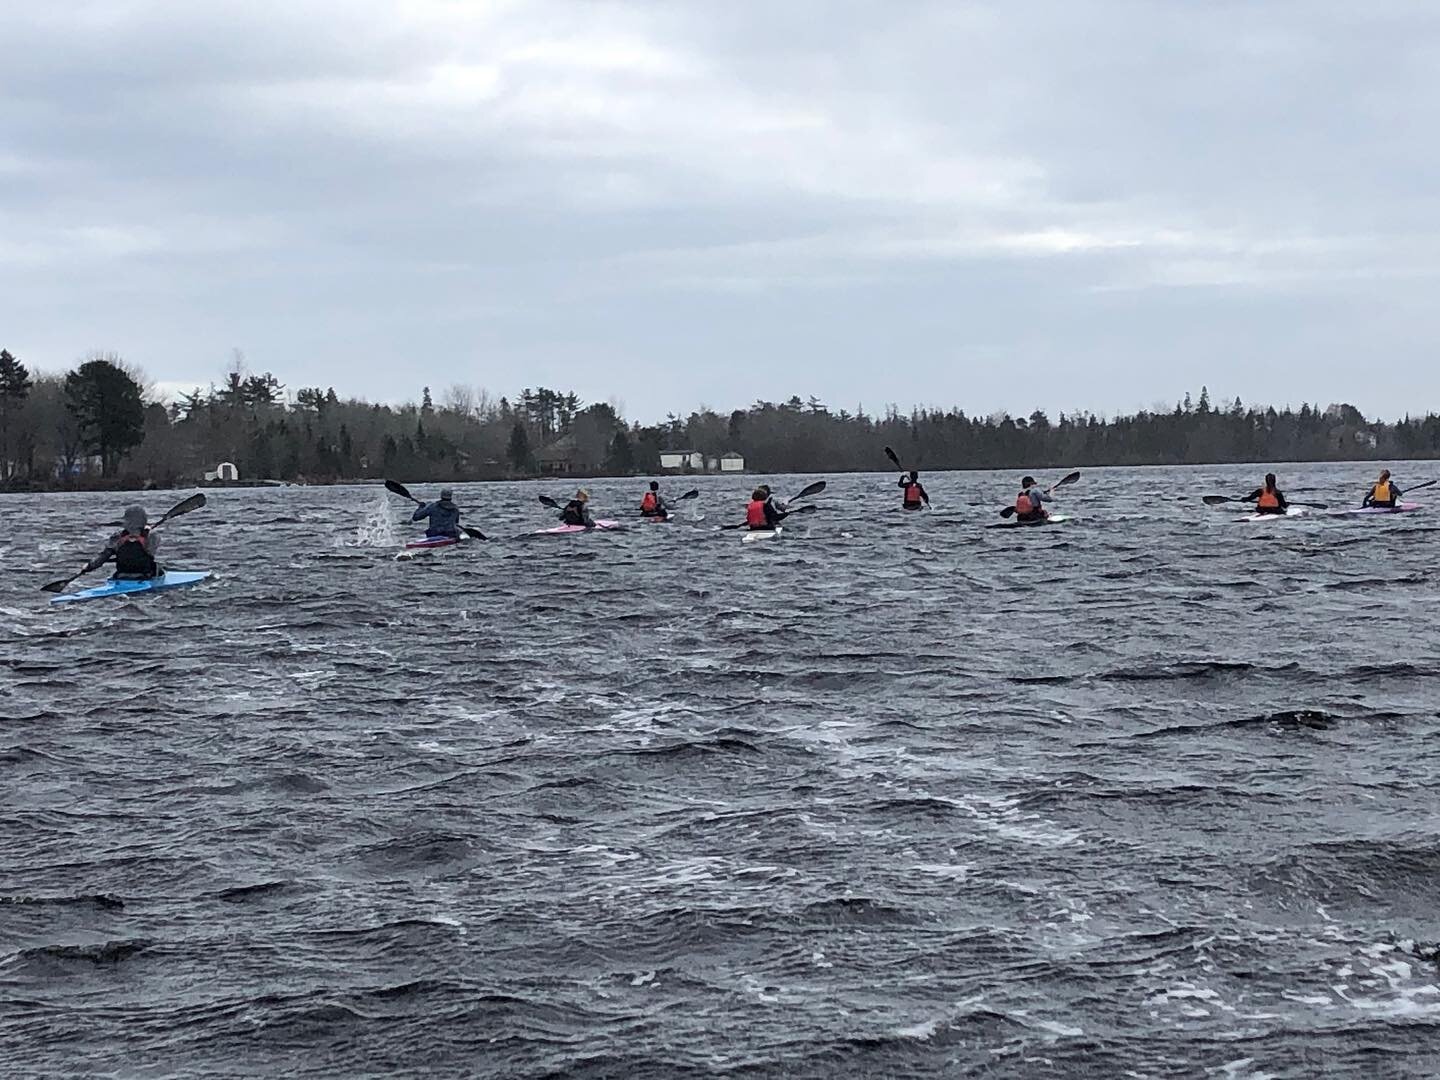 Christmas Day paddle for our Orenda athletes. It was a bit windy, but great to be on the water for the last paddle of 2020 &hearts;️🎄#wepaddle